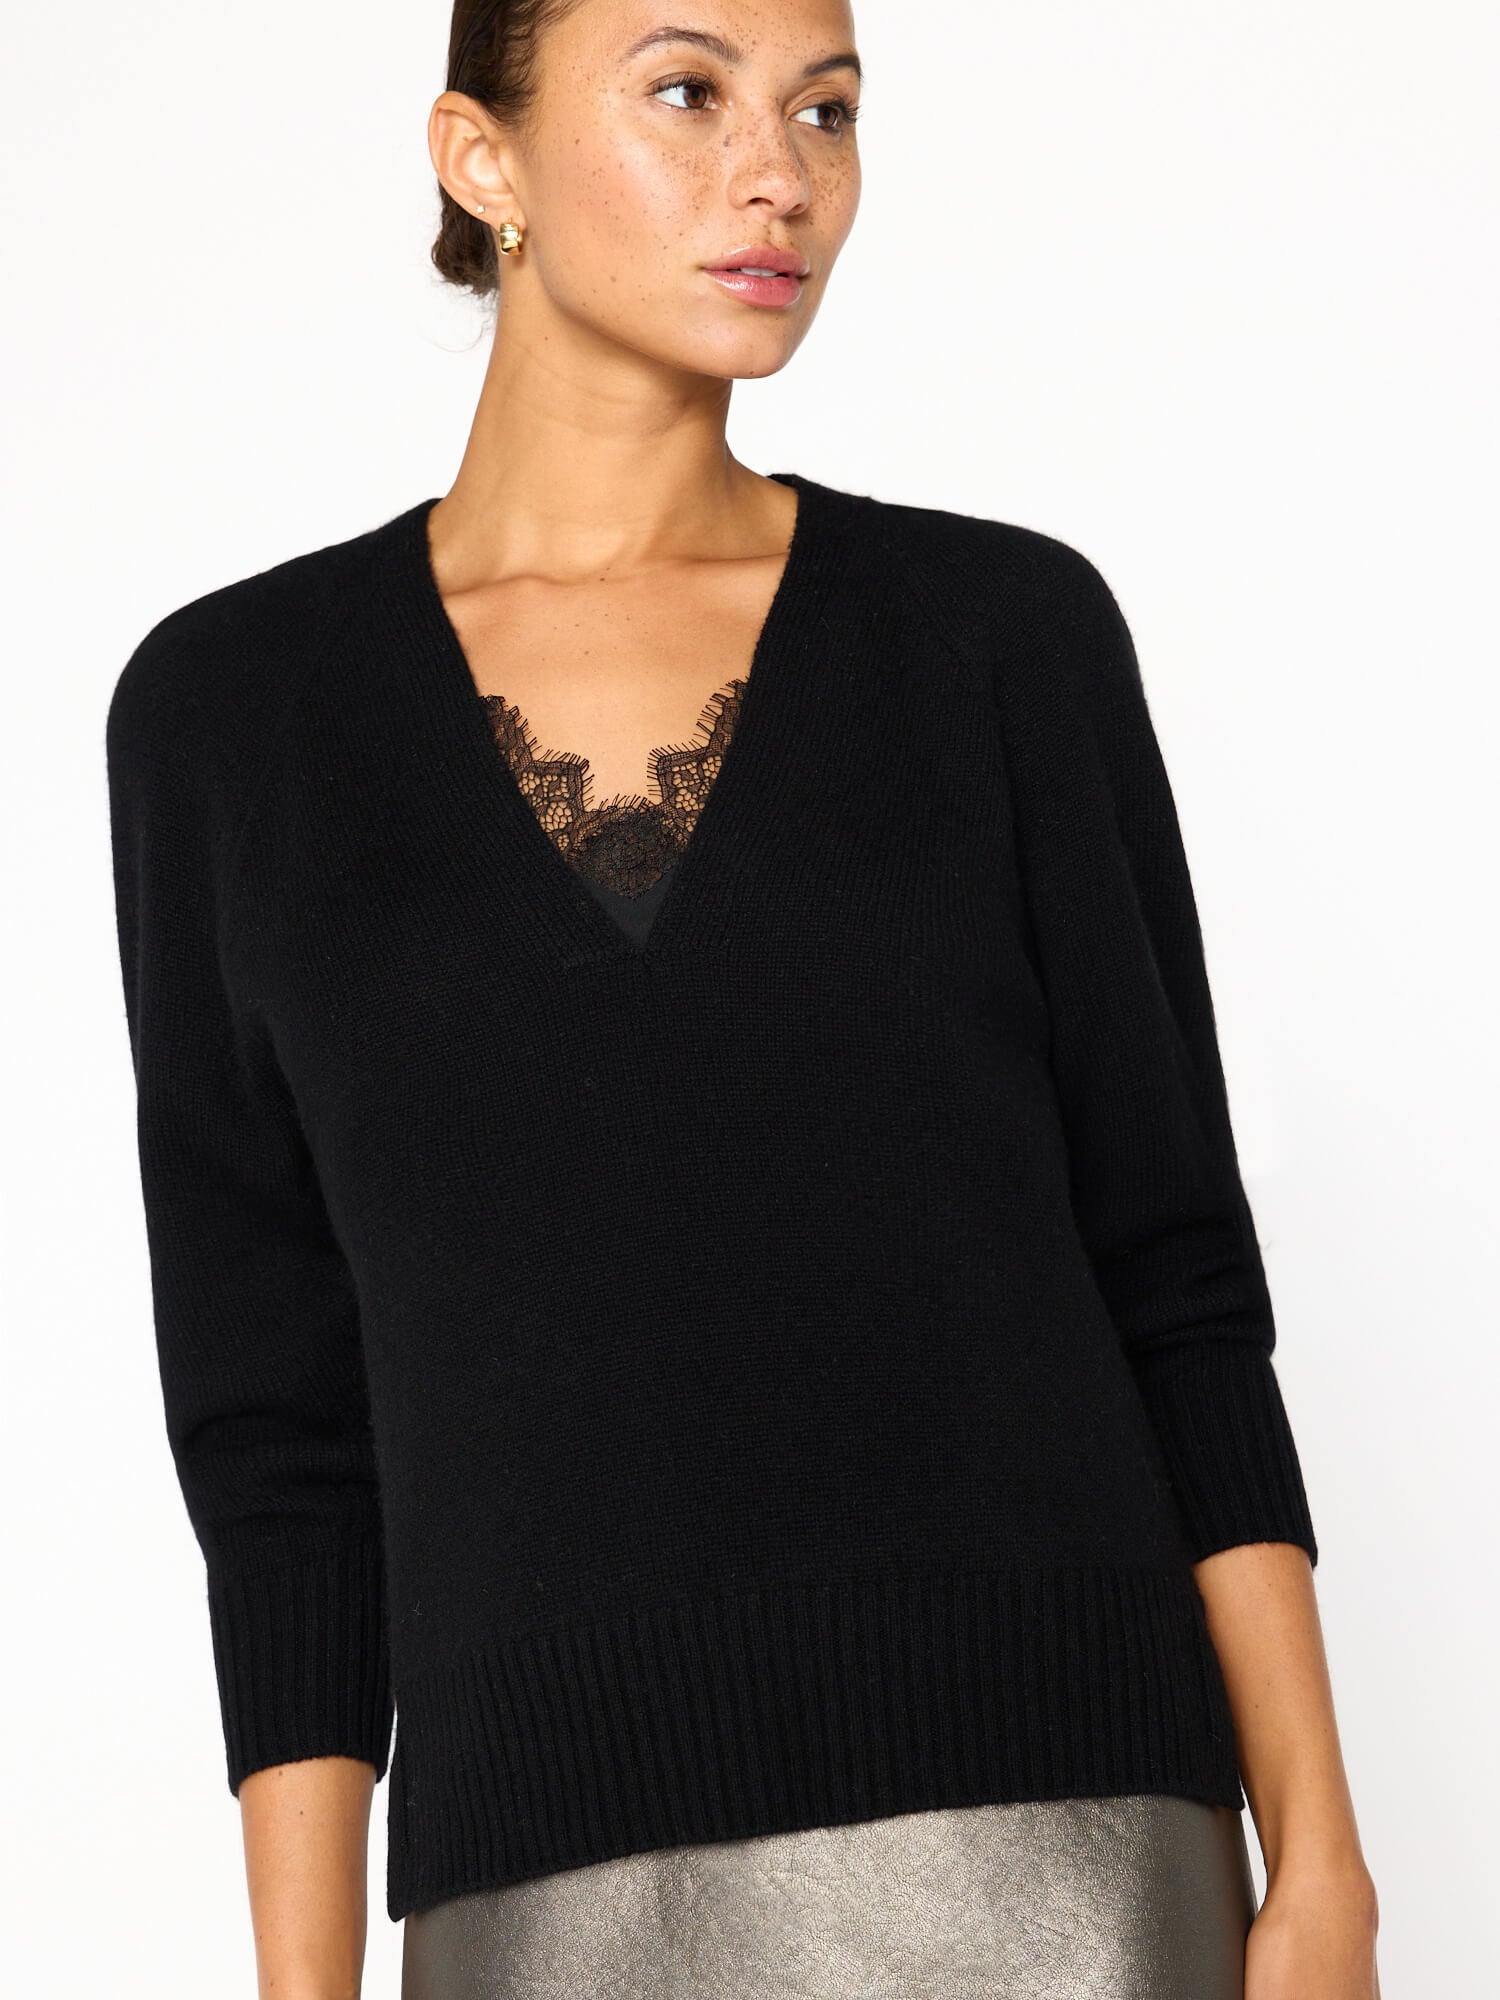 Ida black layered lace v-neck sweater front view 2